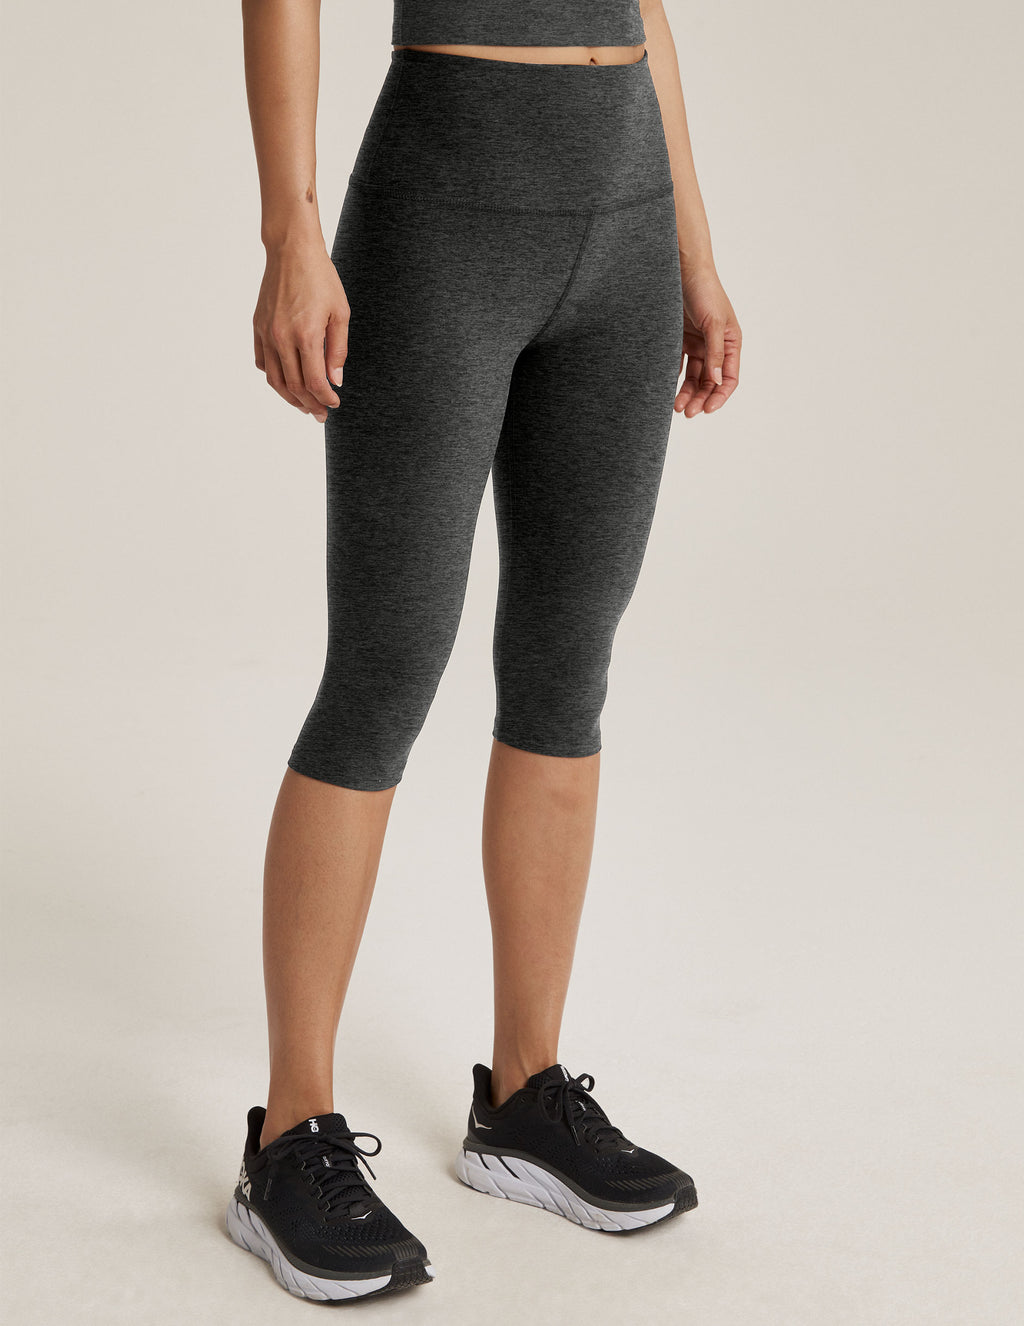 Spacedye Pedal Pusher High Waisted Legging Secondary Image